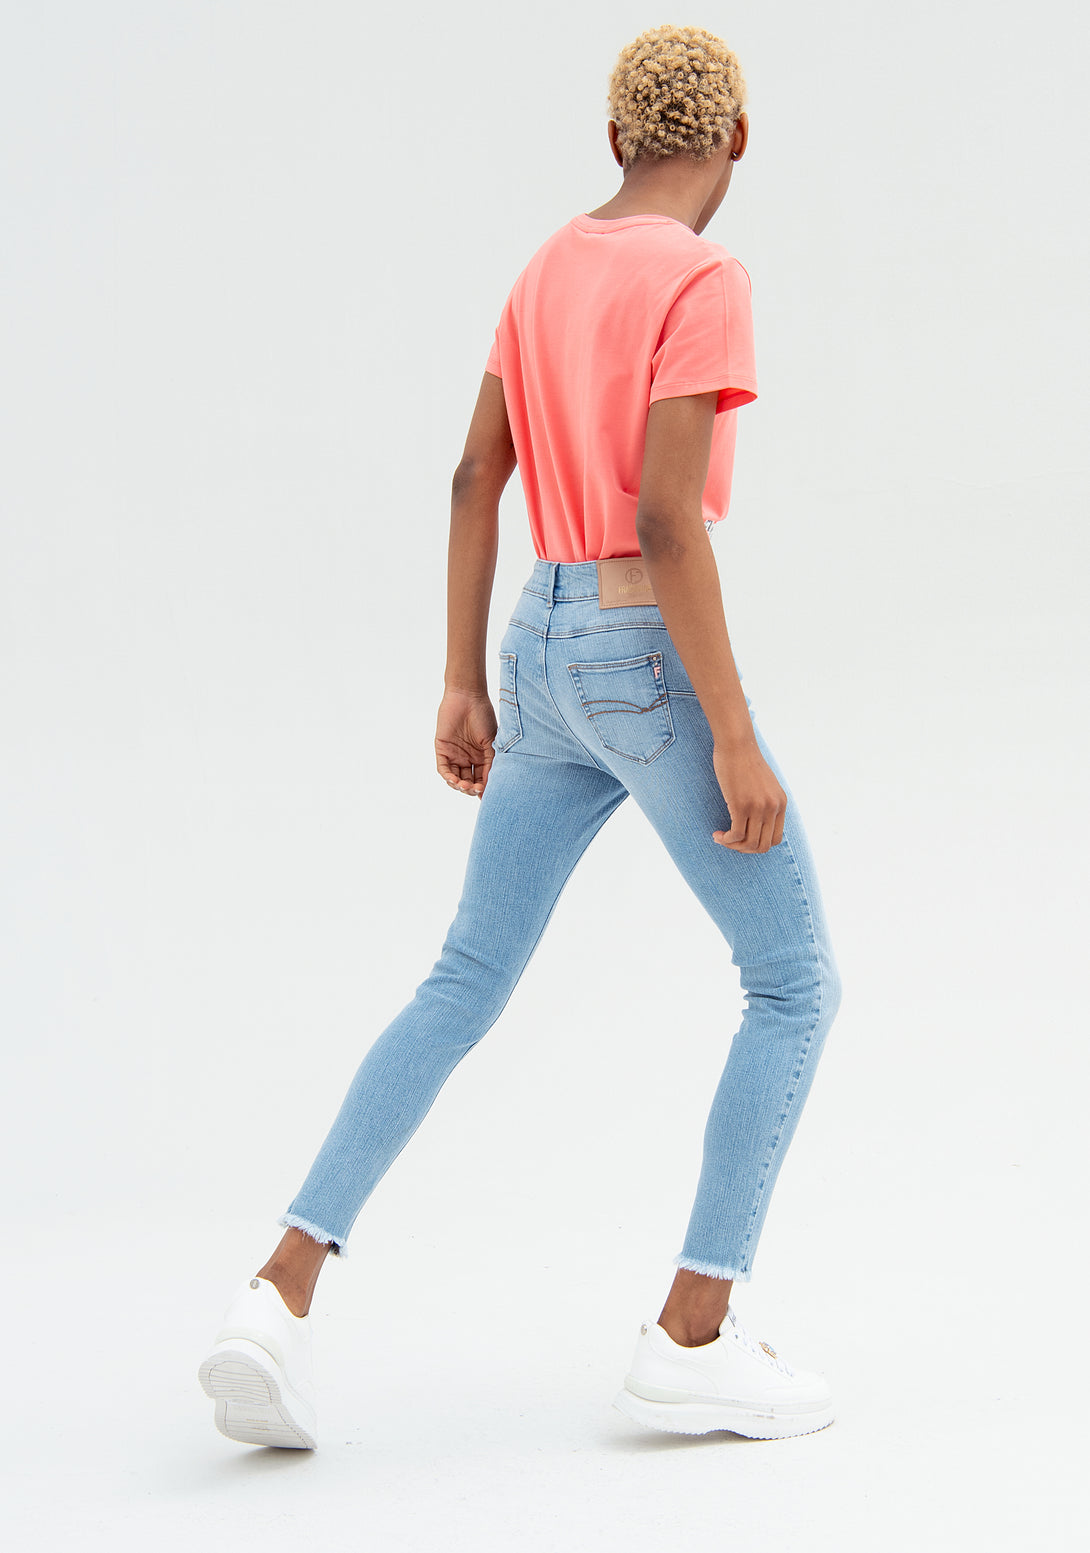 Jeans skinny fit made in denim with light wash and push-up effect